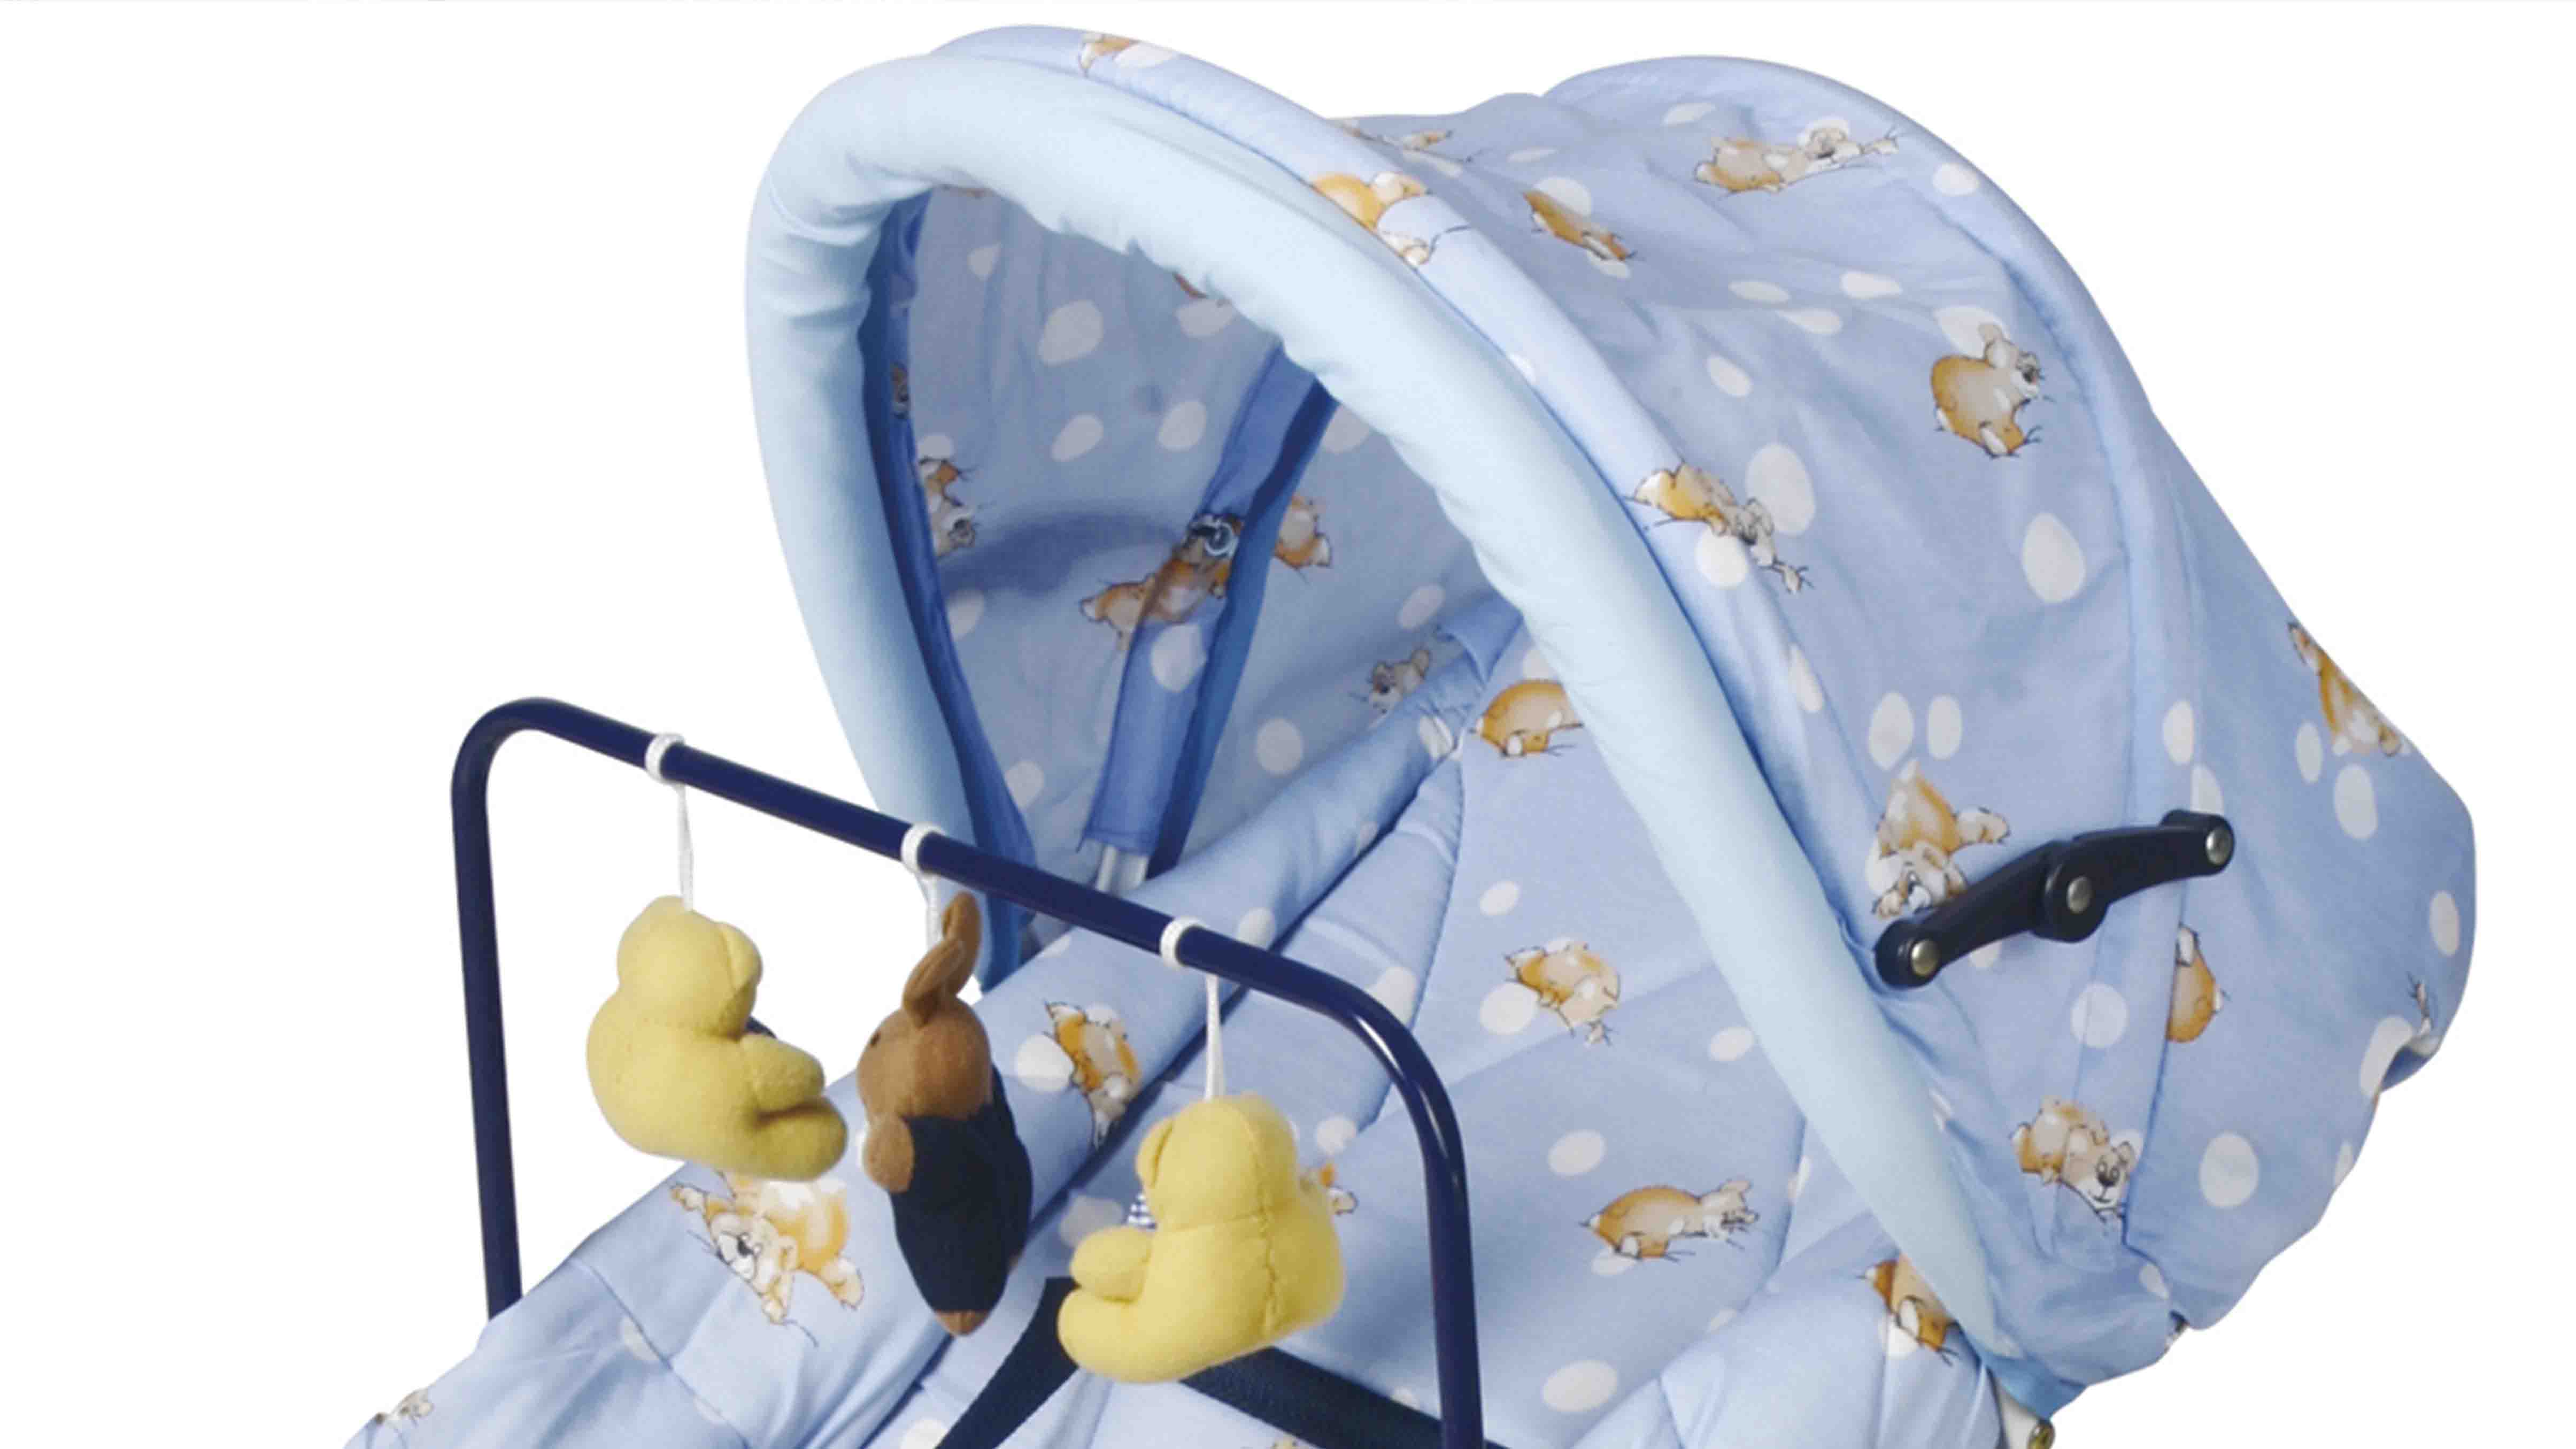 Aoqi comfortable baby rocker price supplier for bedroom